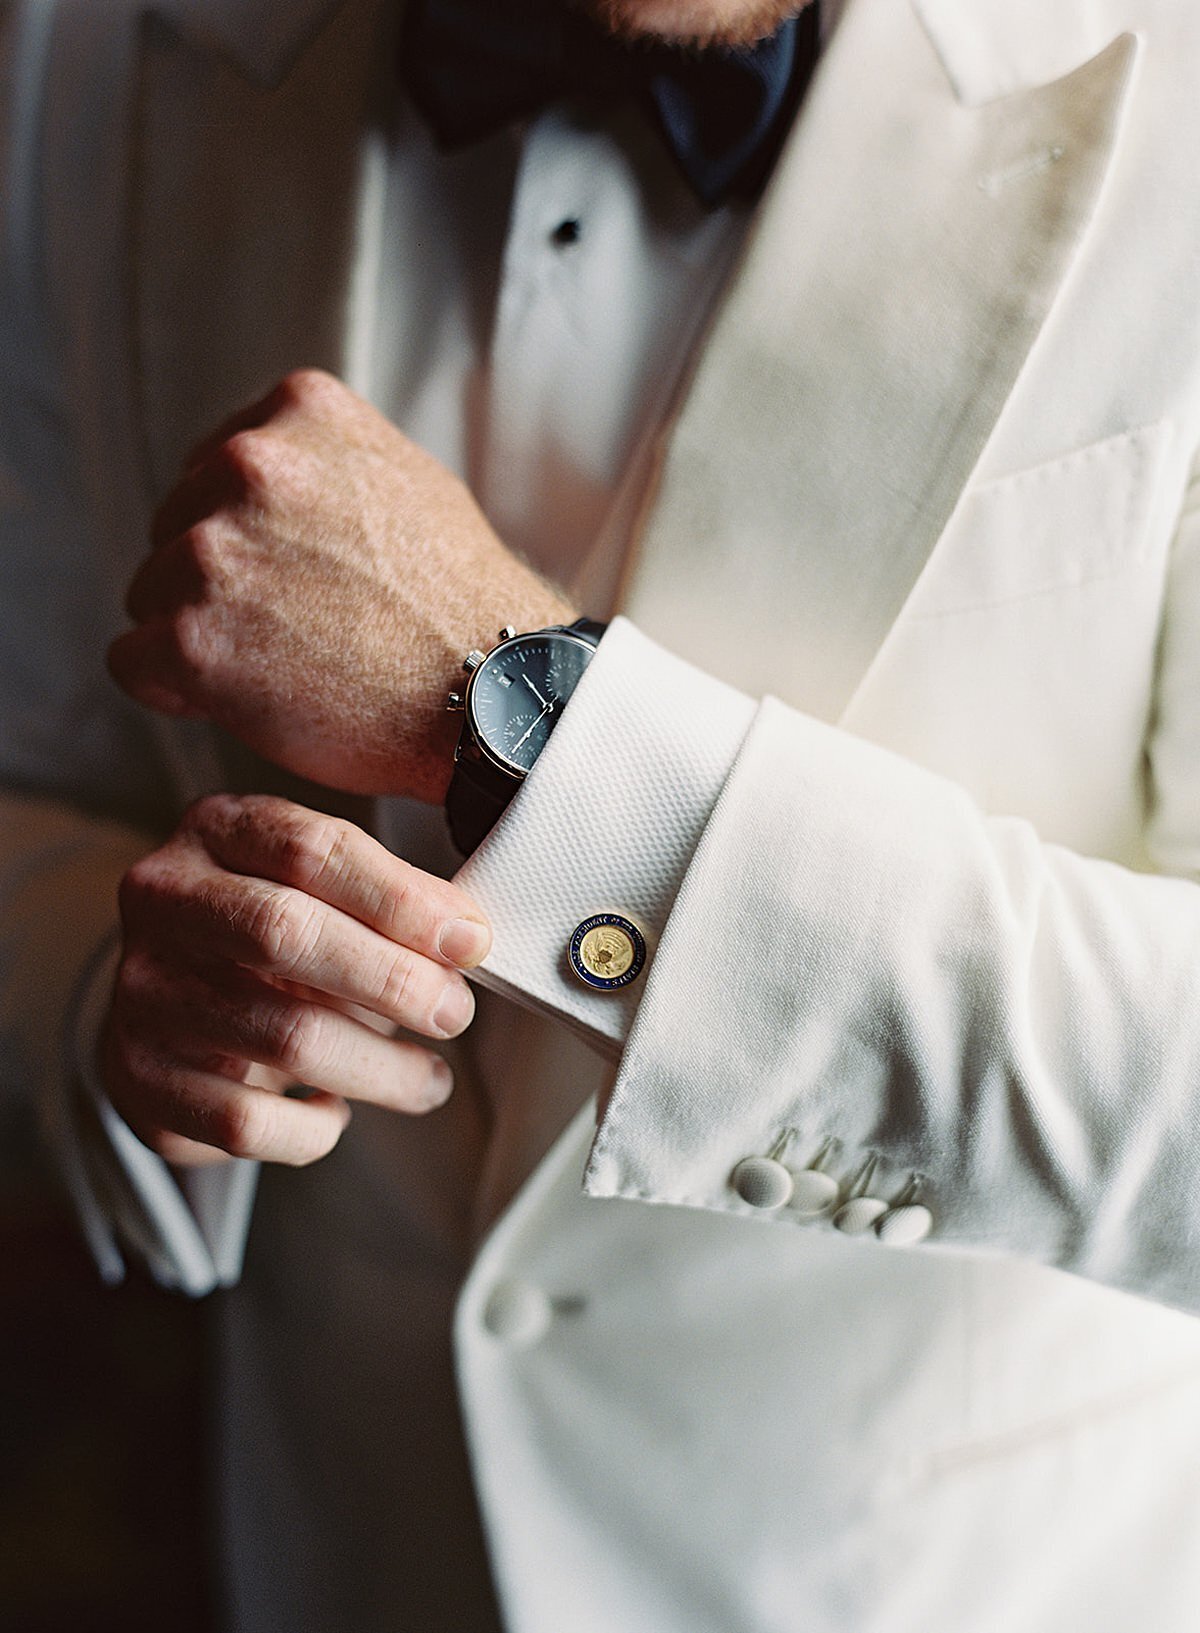 The groom getting ready by putting on his cufflinks and his white tuxedo jacket before the wedding.